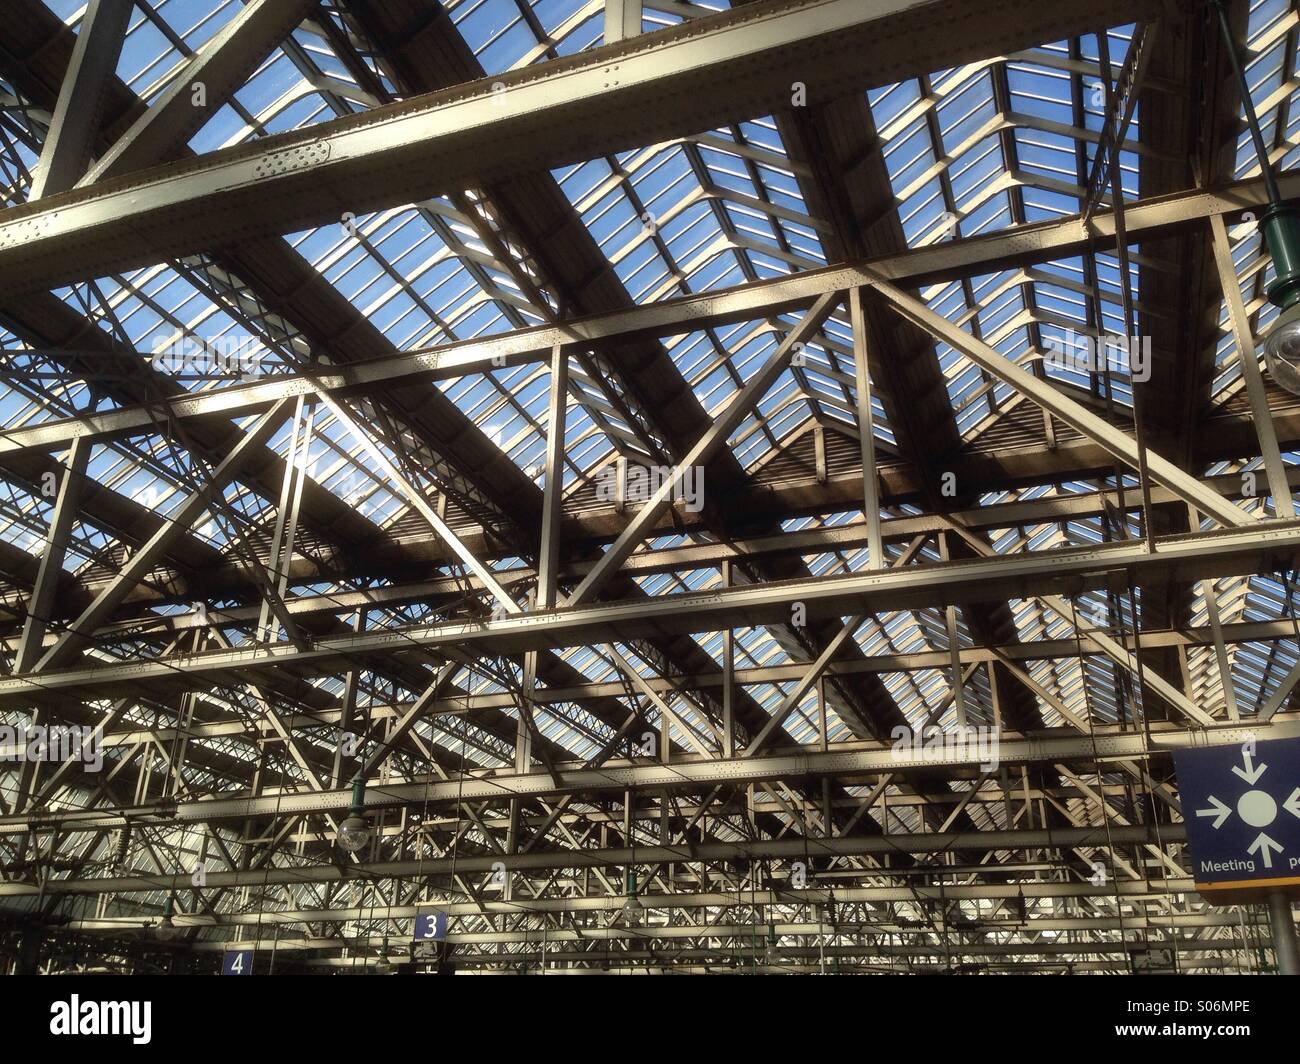 Victorian Station roof on a sunny day Stock Photo